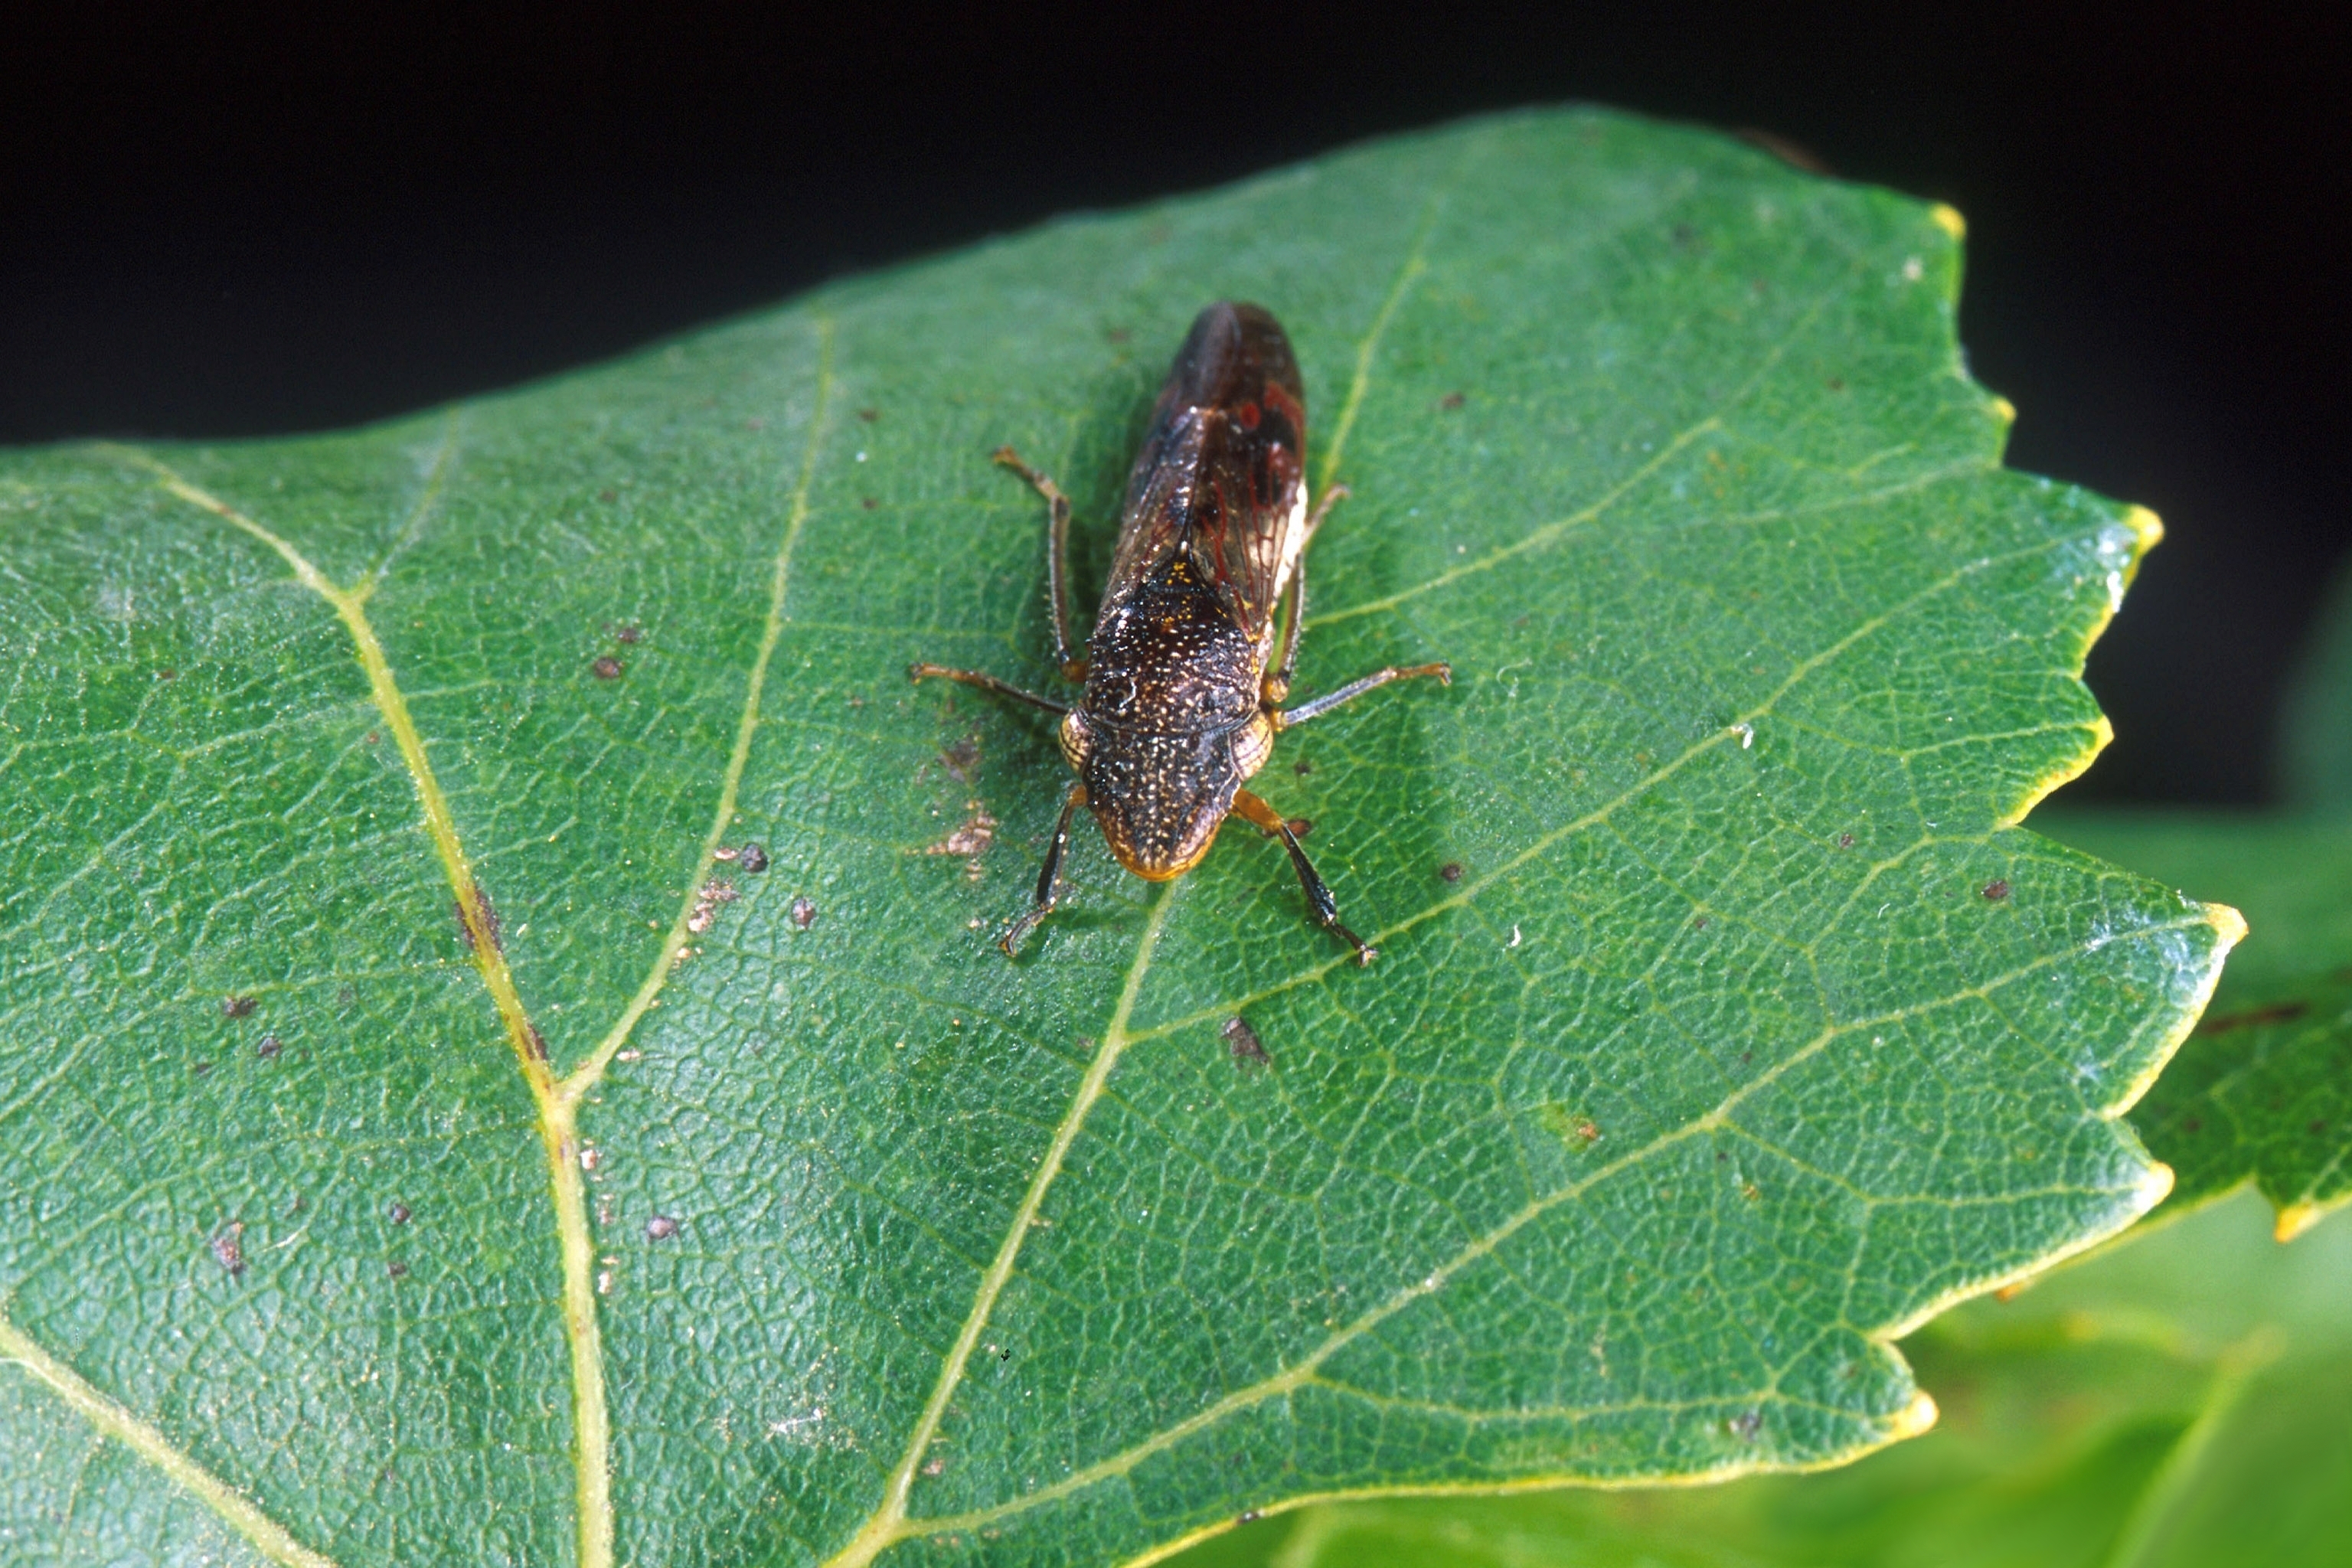 A small, dark brown insect with a triangular head and transparent wings sits on a grape leaf.